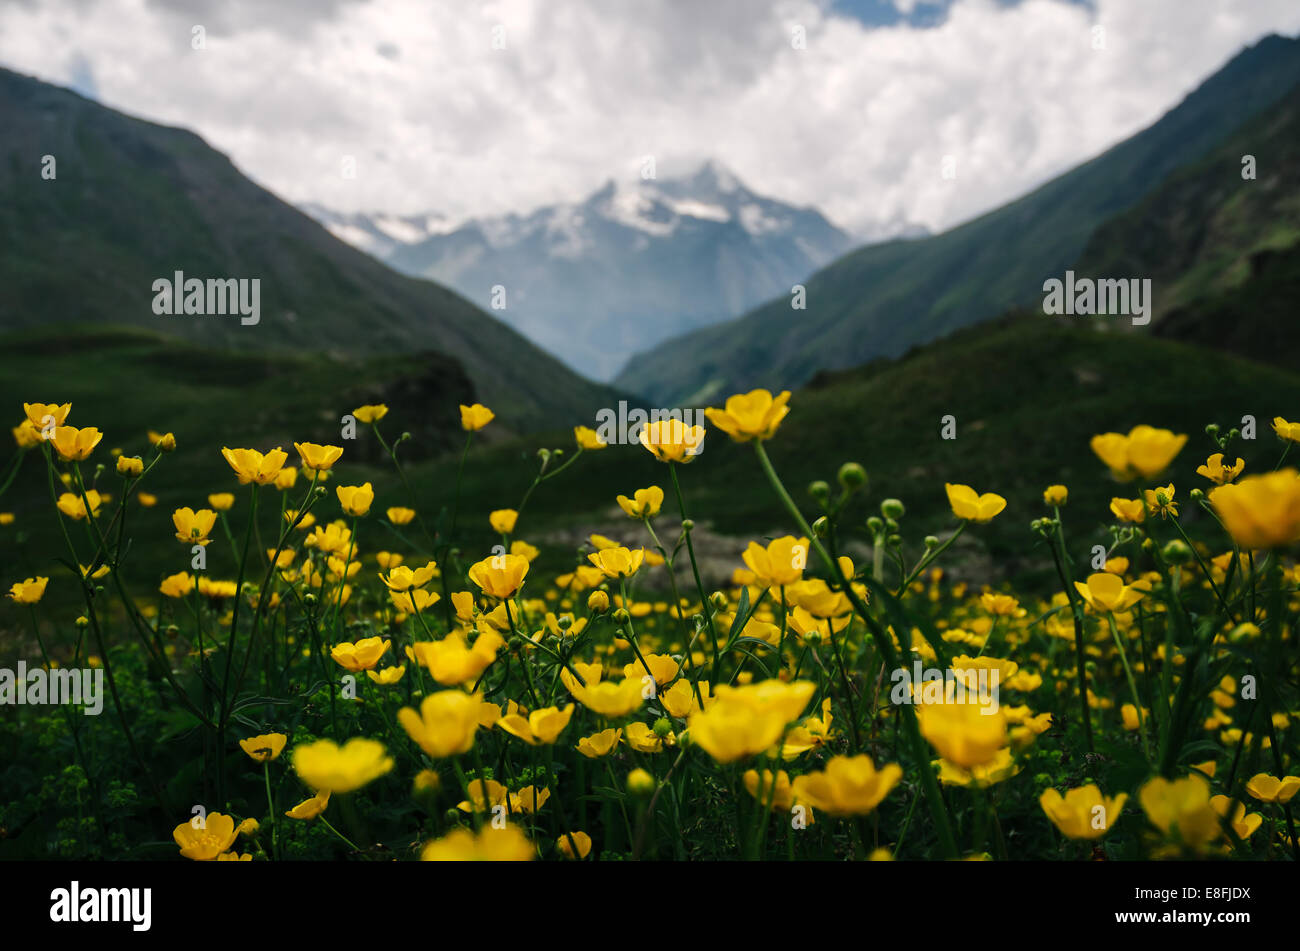 Scenic mountain landscape with wildflowers Stock Photo